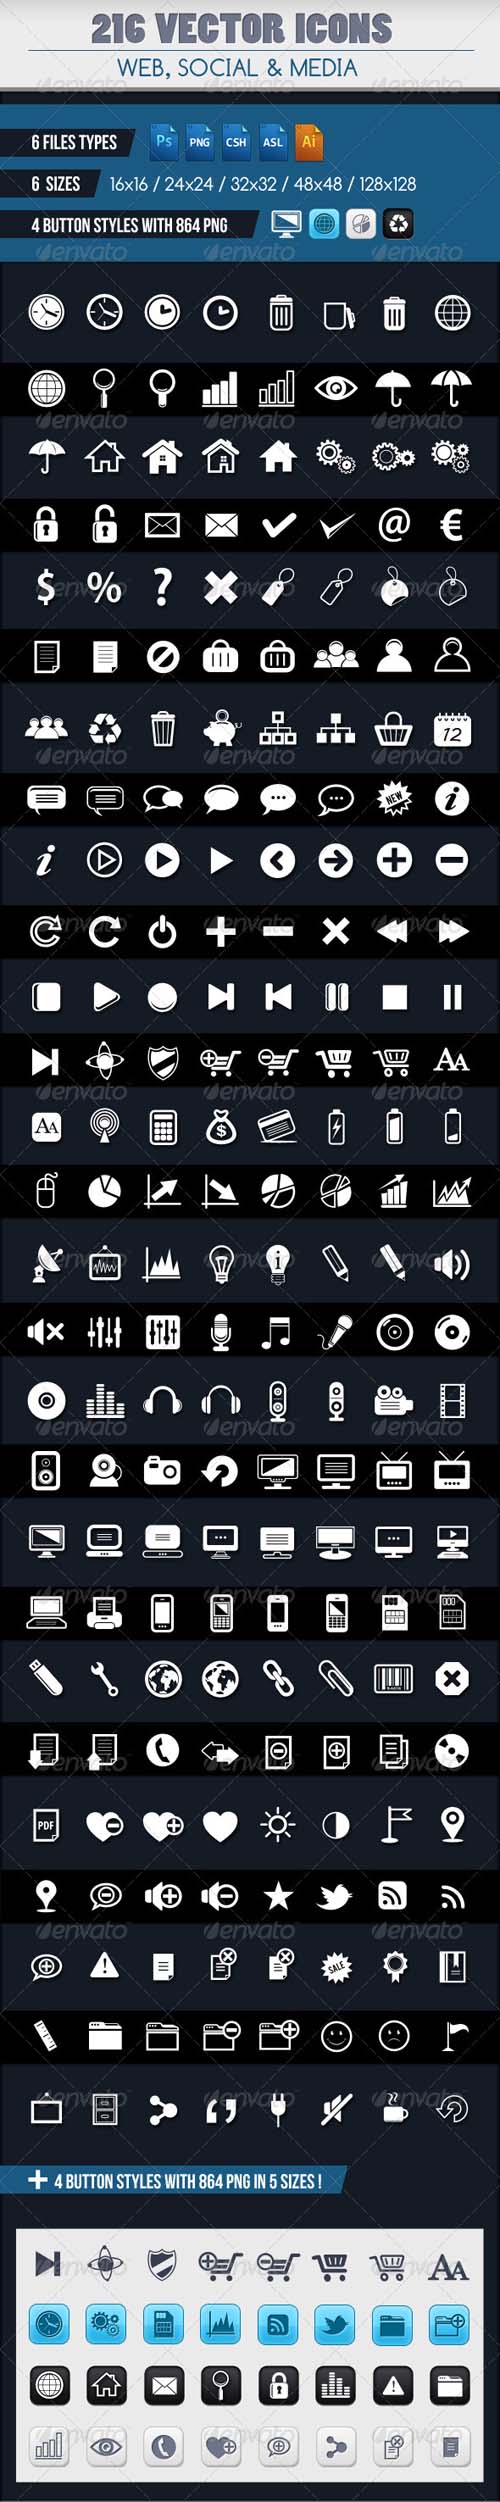 GraphicRiver 224 VECTOR ICONS SET